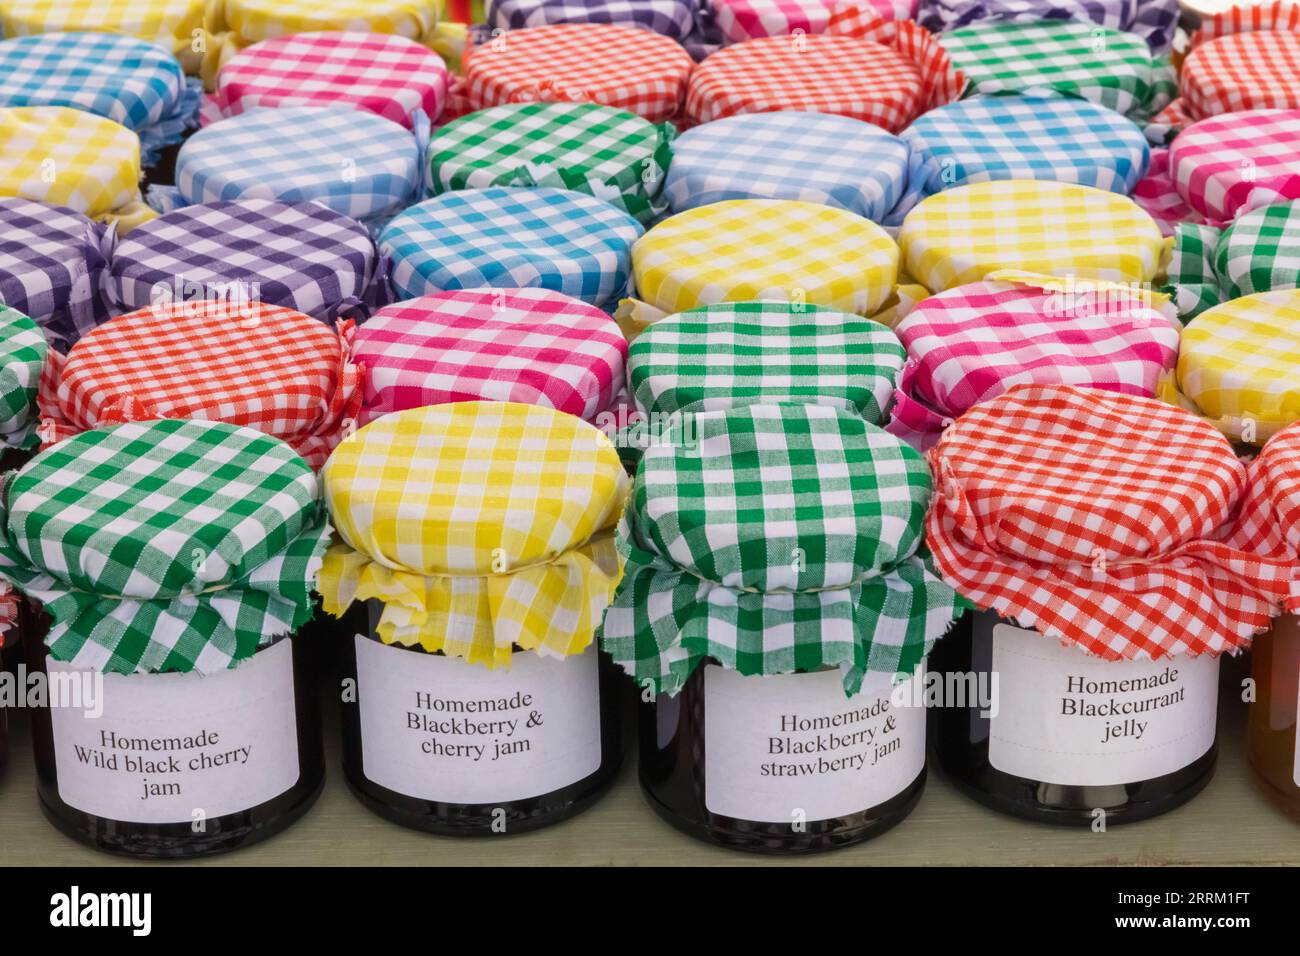 England, Kent, Maidstone, Leeds, Leeds Castle, Medieval Festival, Colourful Display of Traditional Homemade Jams Stock Photo